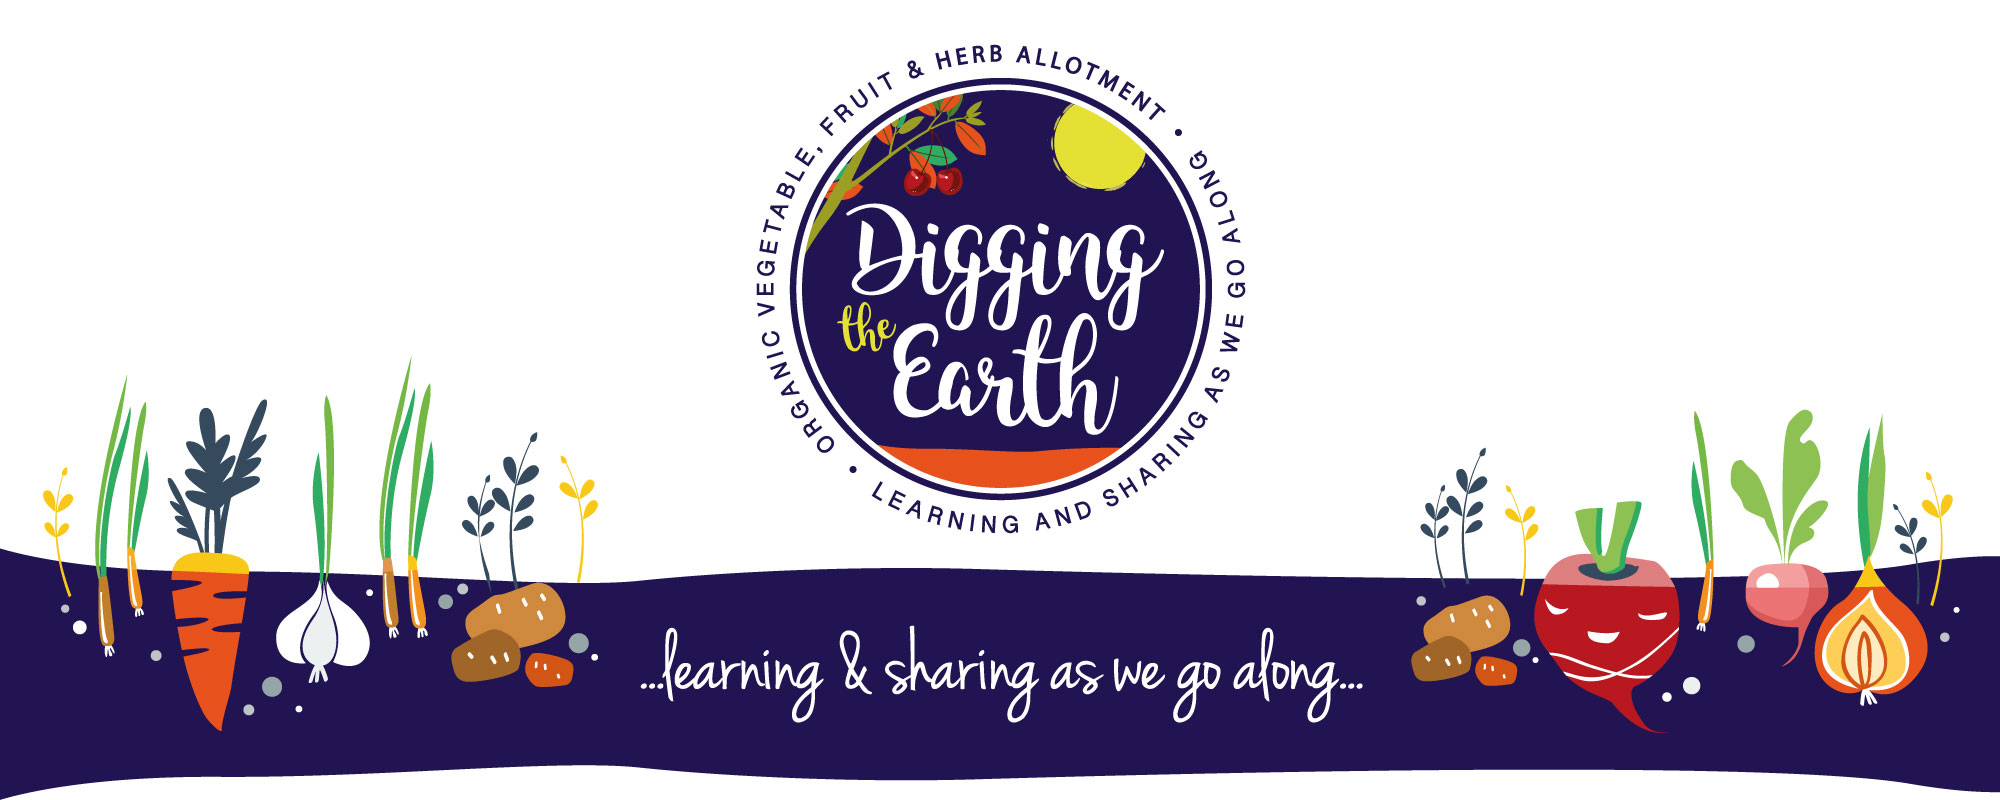 Digging the Earth